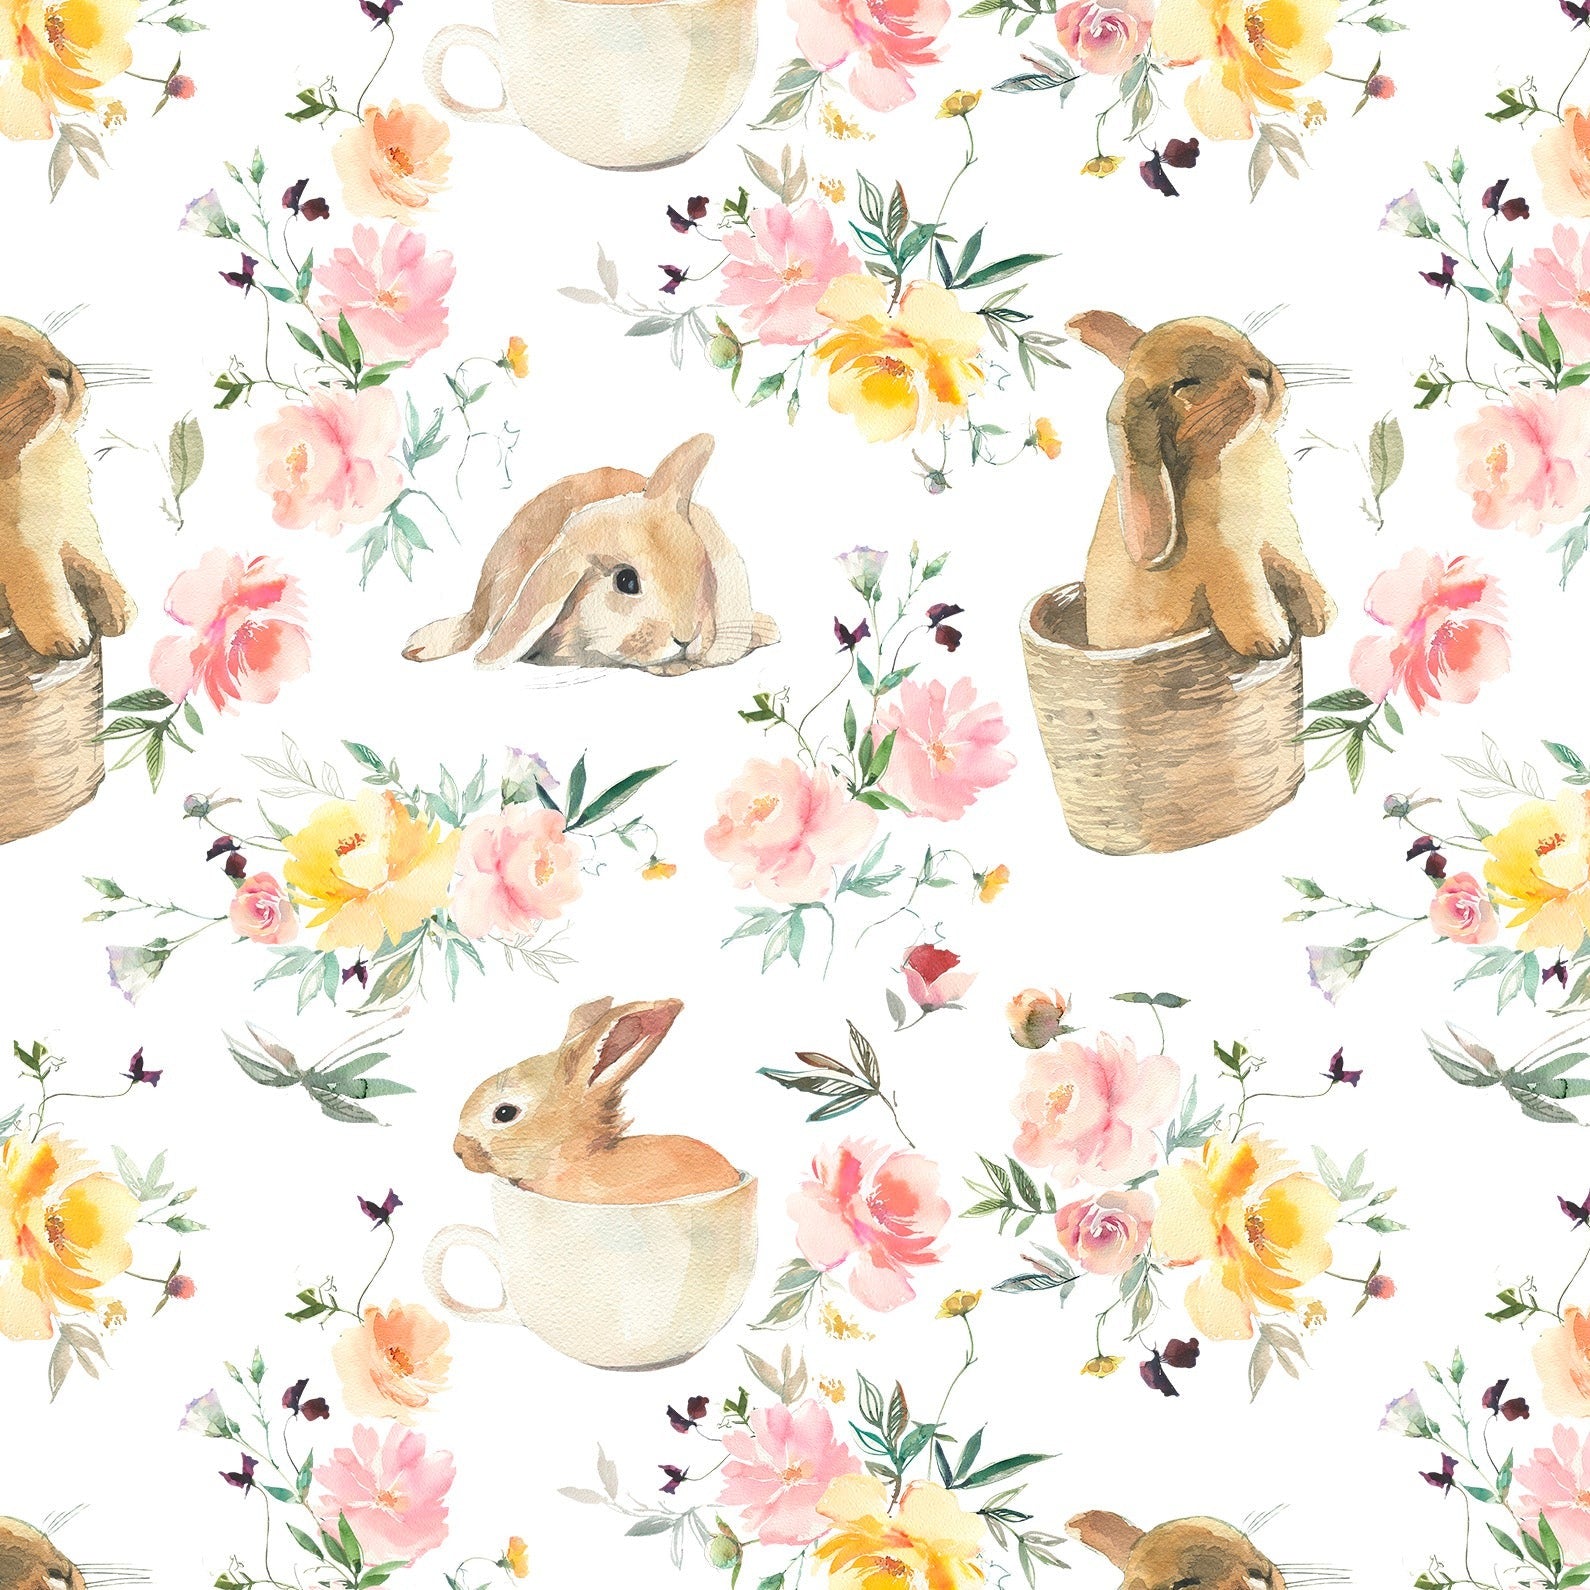 A close-up of the Garden Bunnies Wallpaper, illustrating its intricate design with rabbits in various playful poses among vibrant flowers, perfect for adding a touch of nature and whimsy to any room.